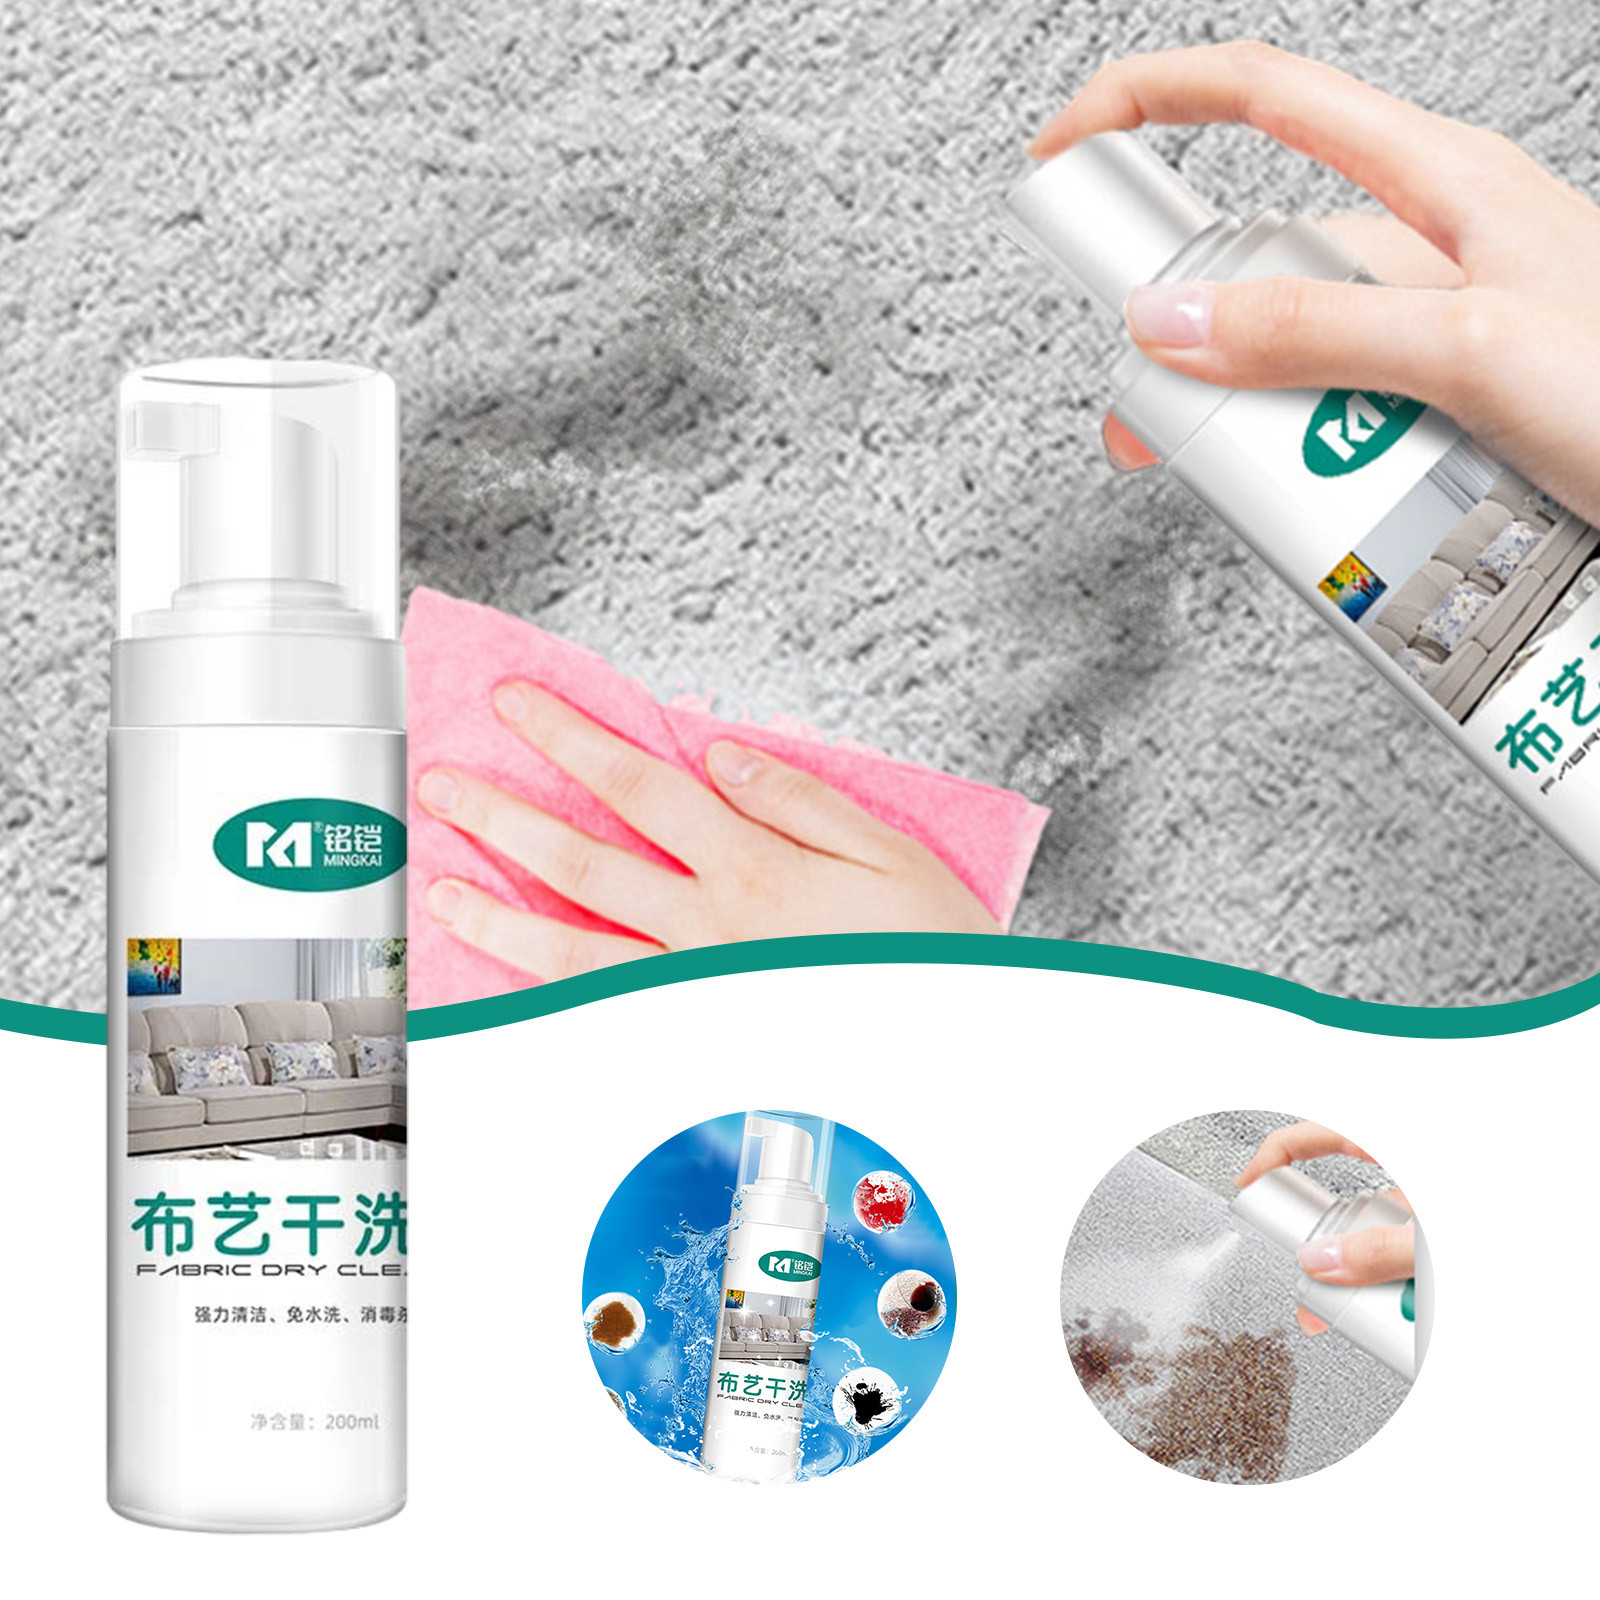 Deyared Microfibre Cleaning Cloths Carpet Remover, Strength Stain ...